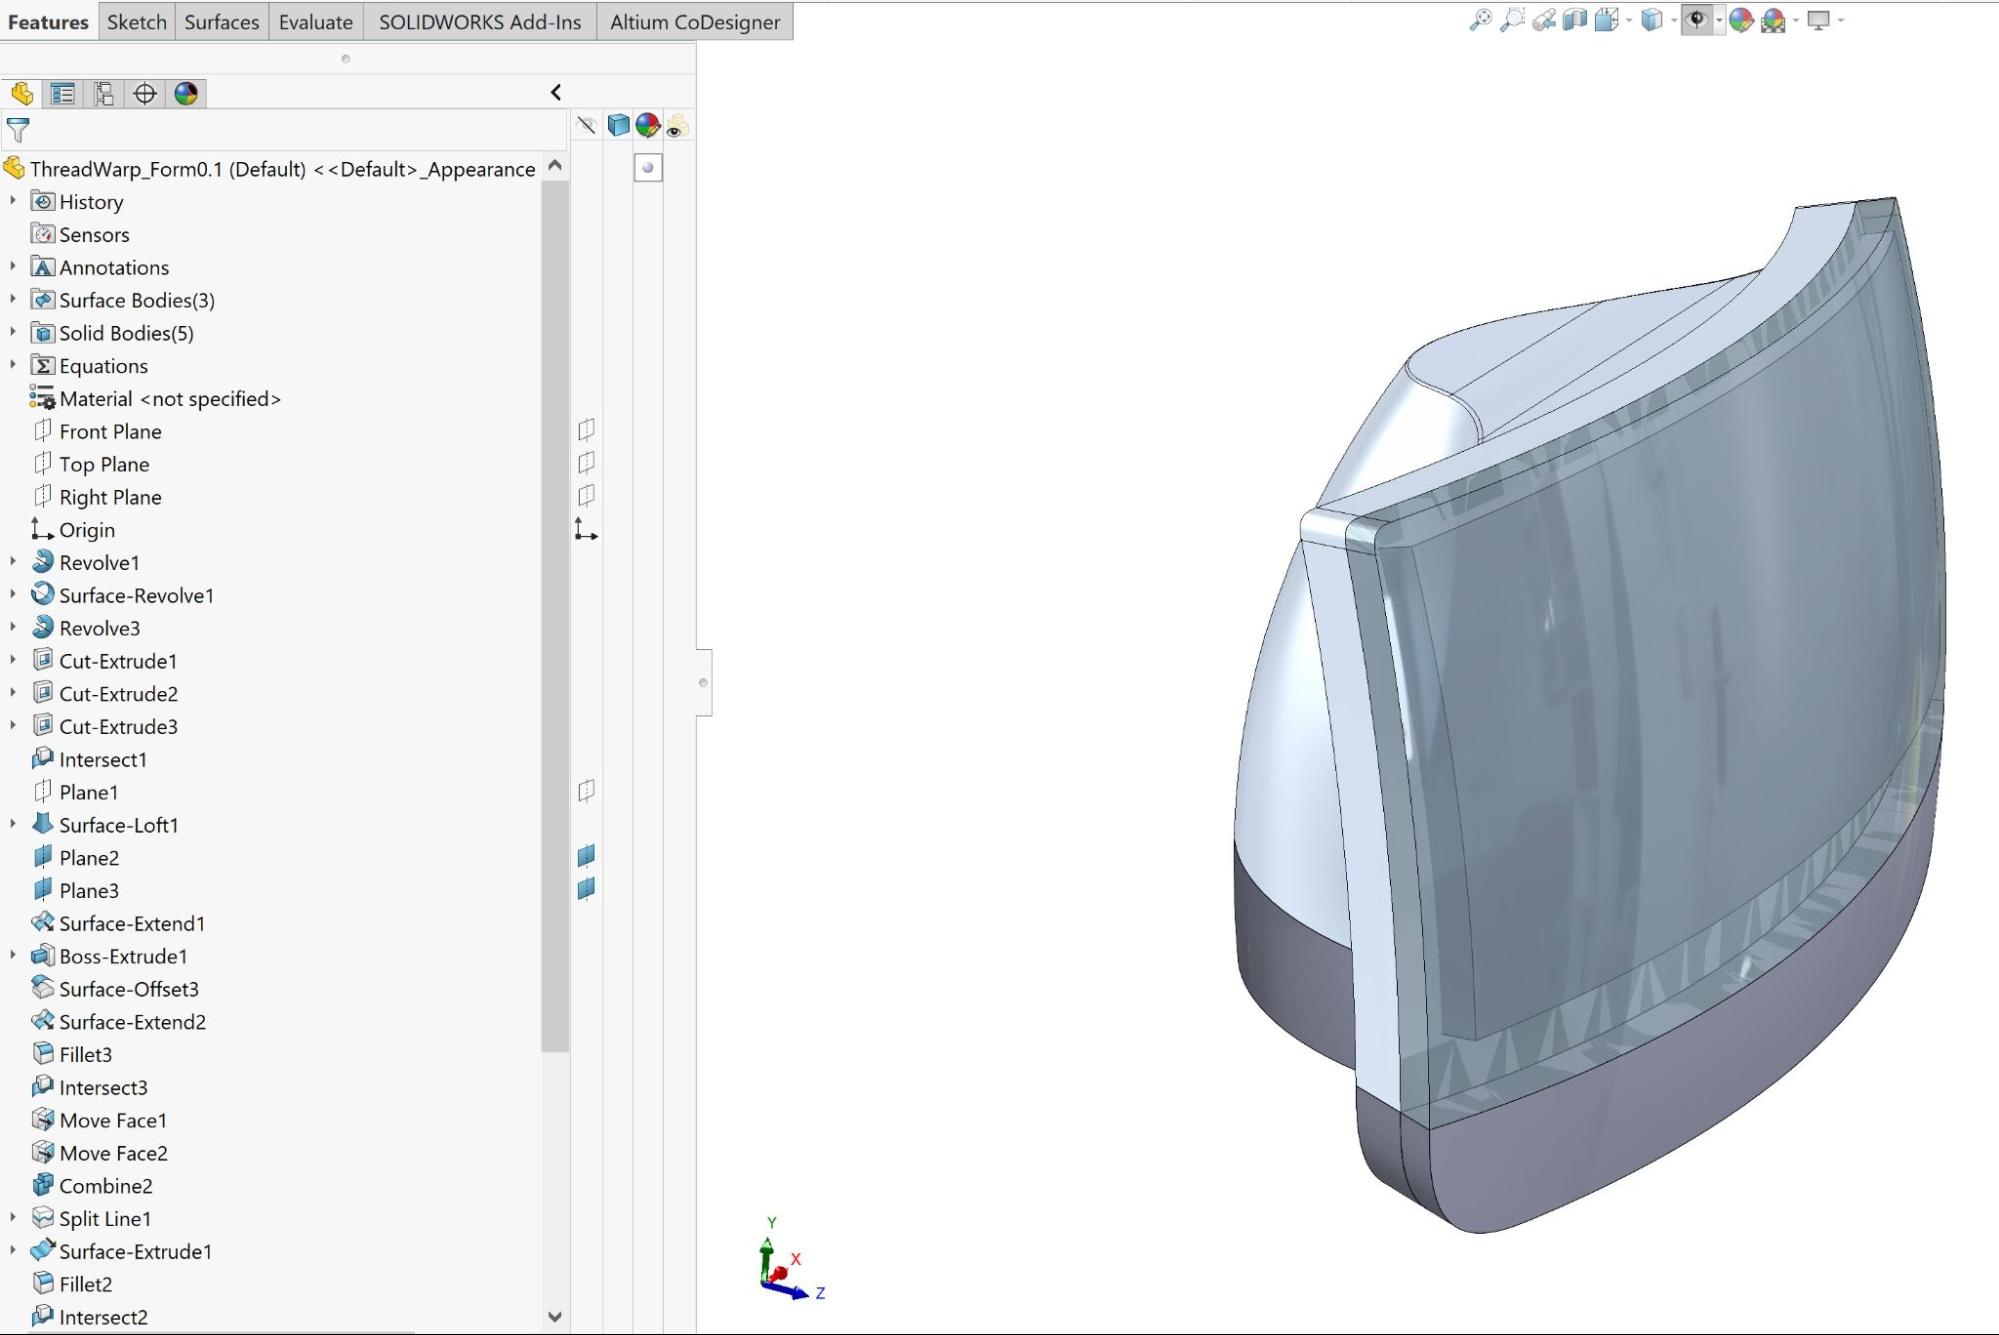 A sample of how files can be organized in a master modeling workflow within Solidworks.